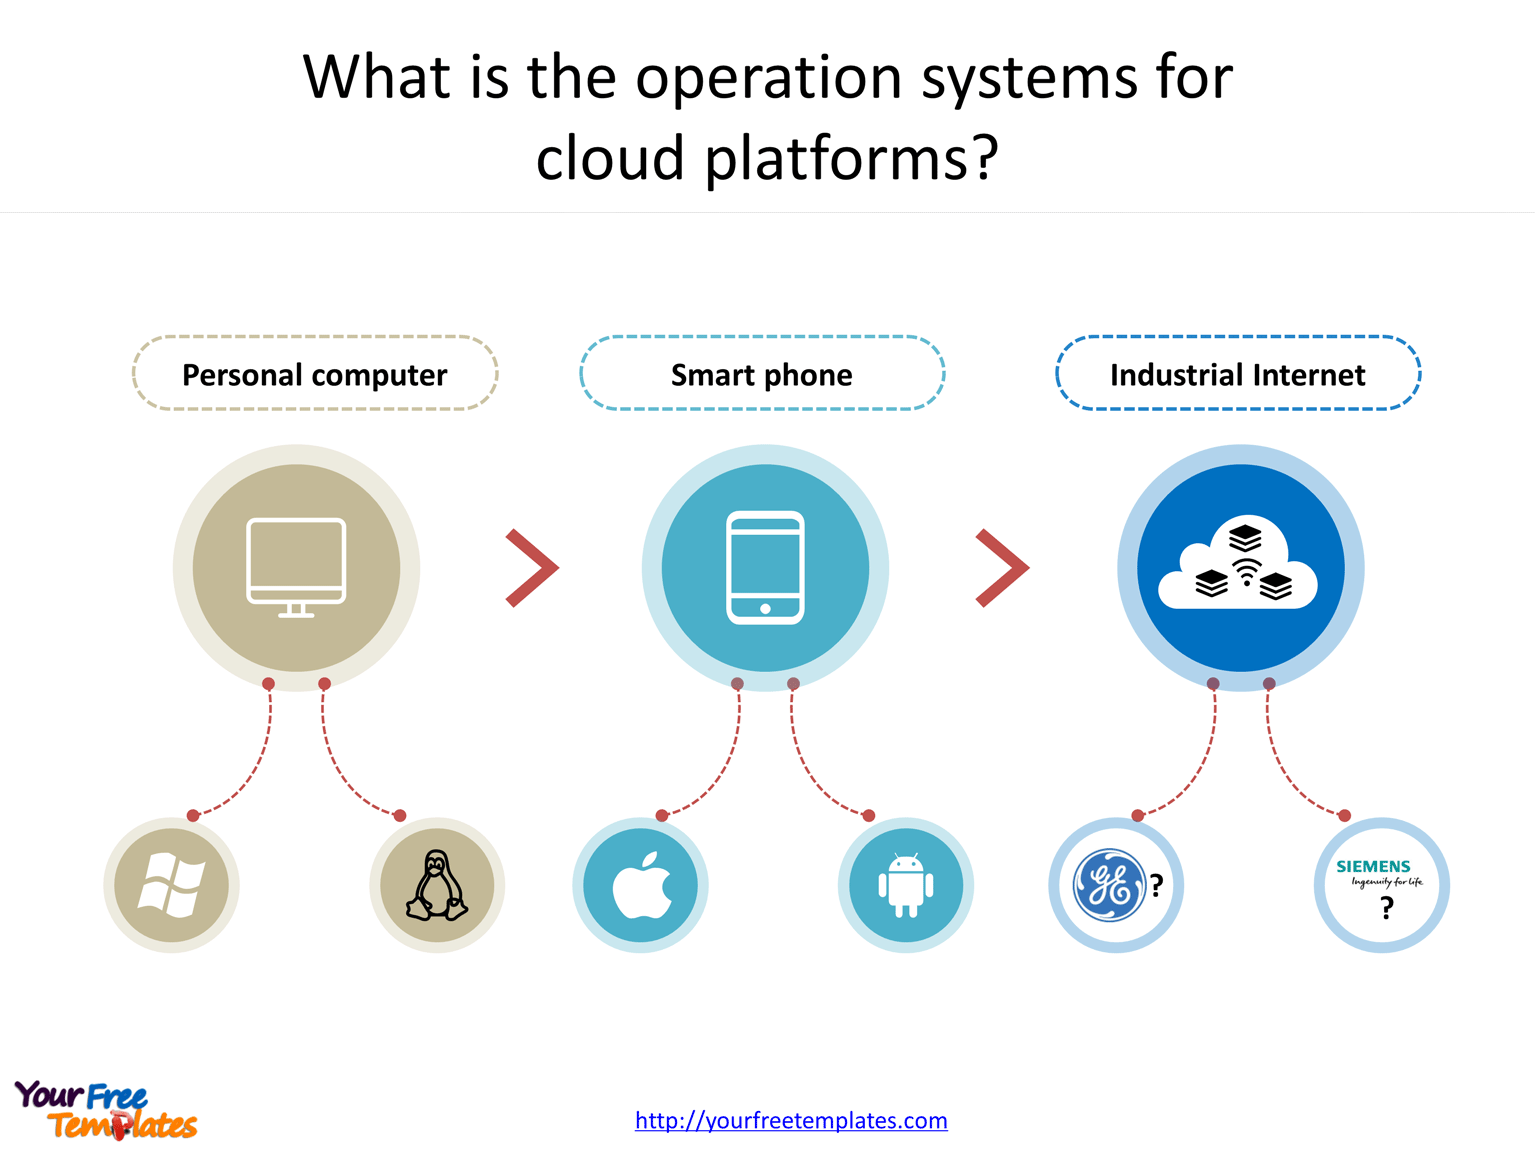 What is the operation systems for industrial internet platforms?